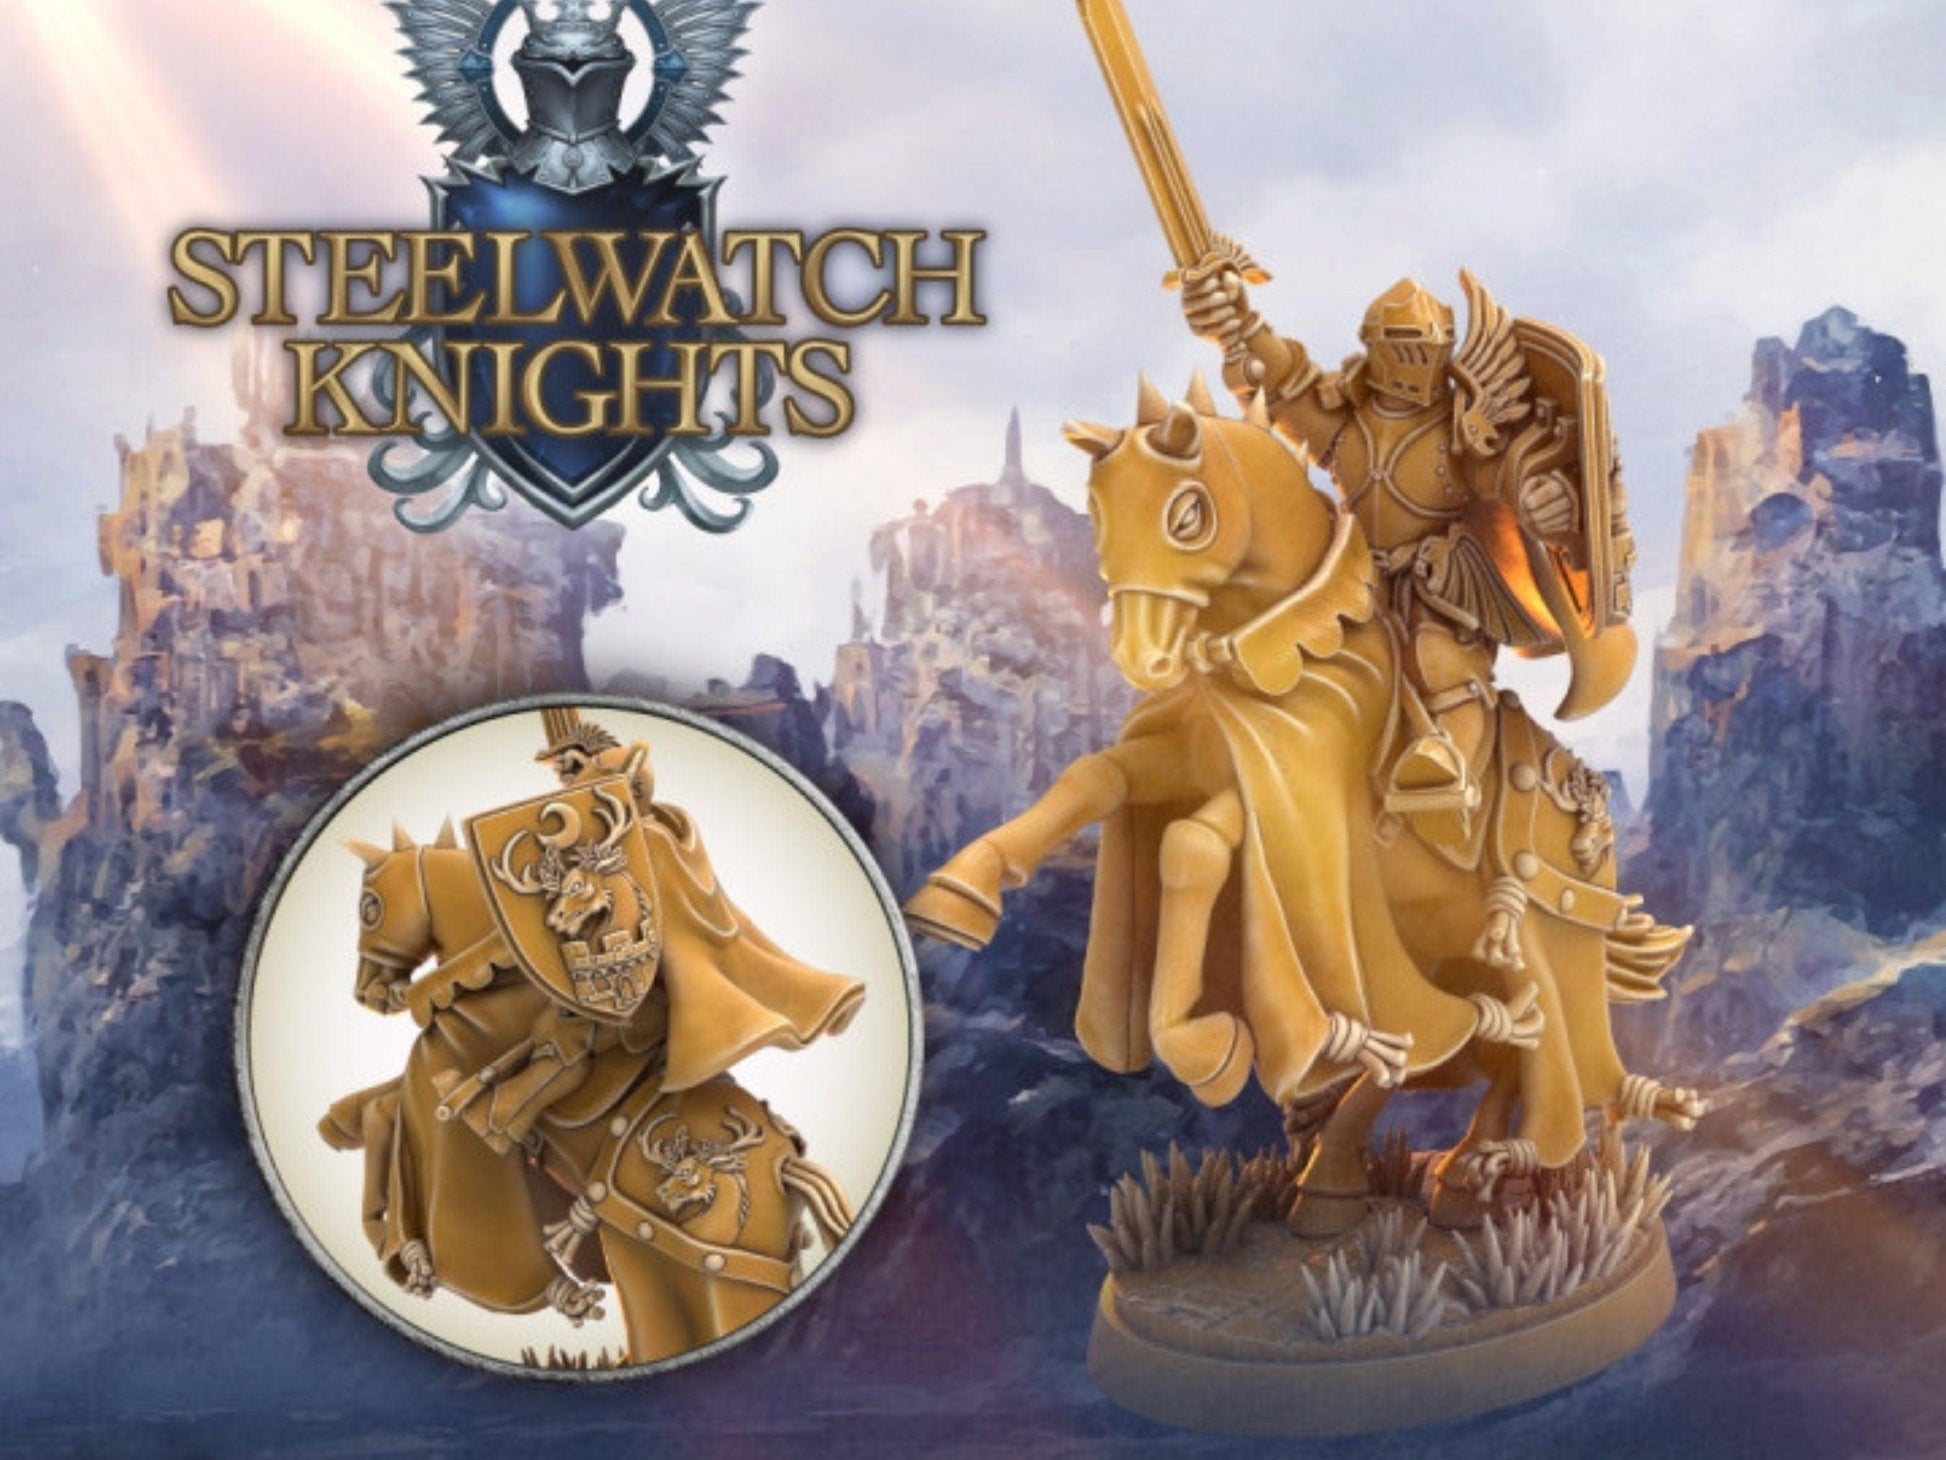 Mounted Paladin miniature Steelwatch | Dragon's Forge | 28mm Scale | DnD Miniature | Dungeons and Dragons | Female Paladin knight - Plague Miniatures shop for DnD Miniatures